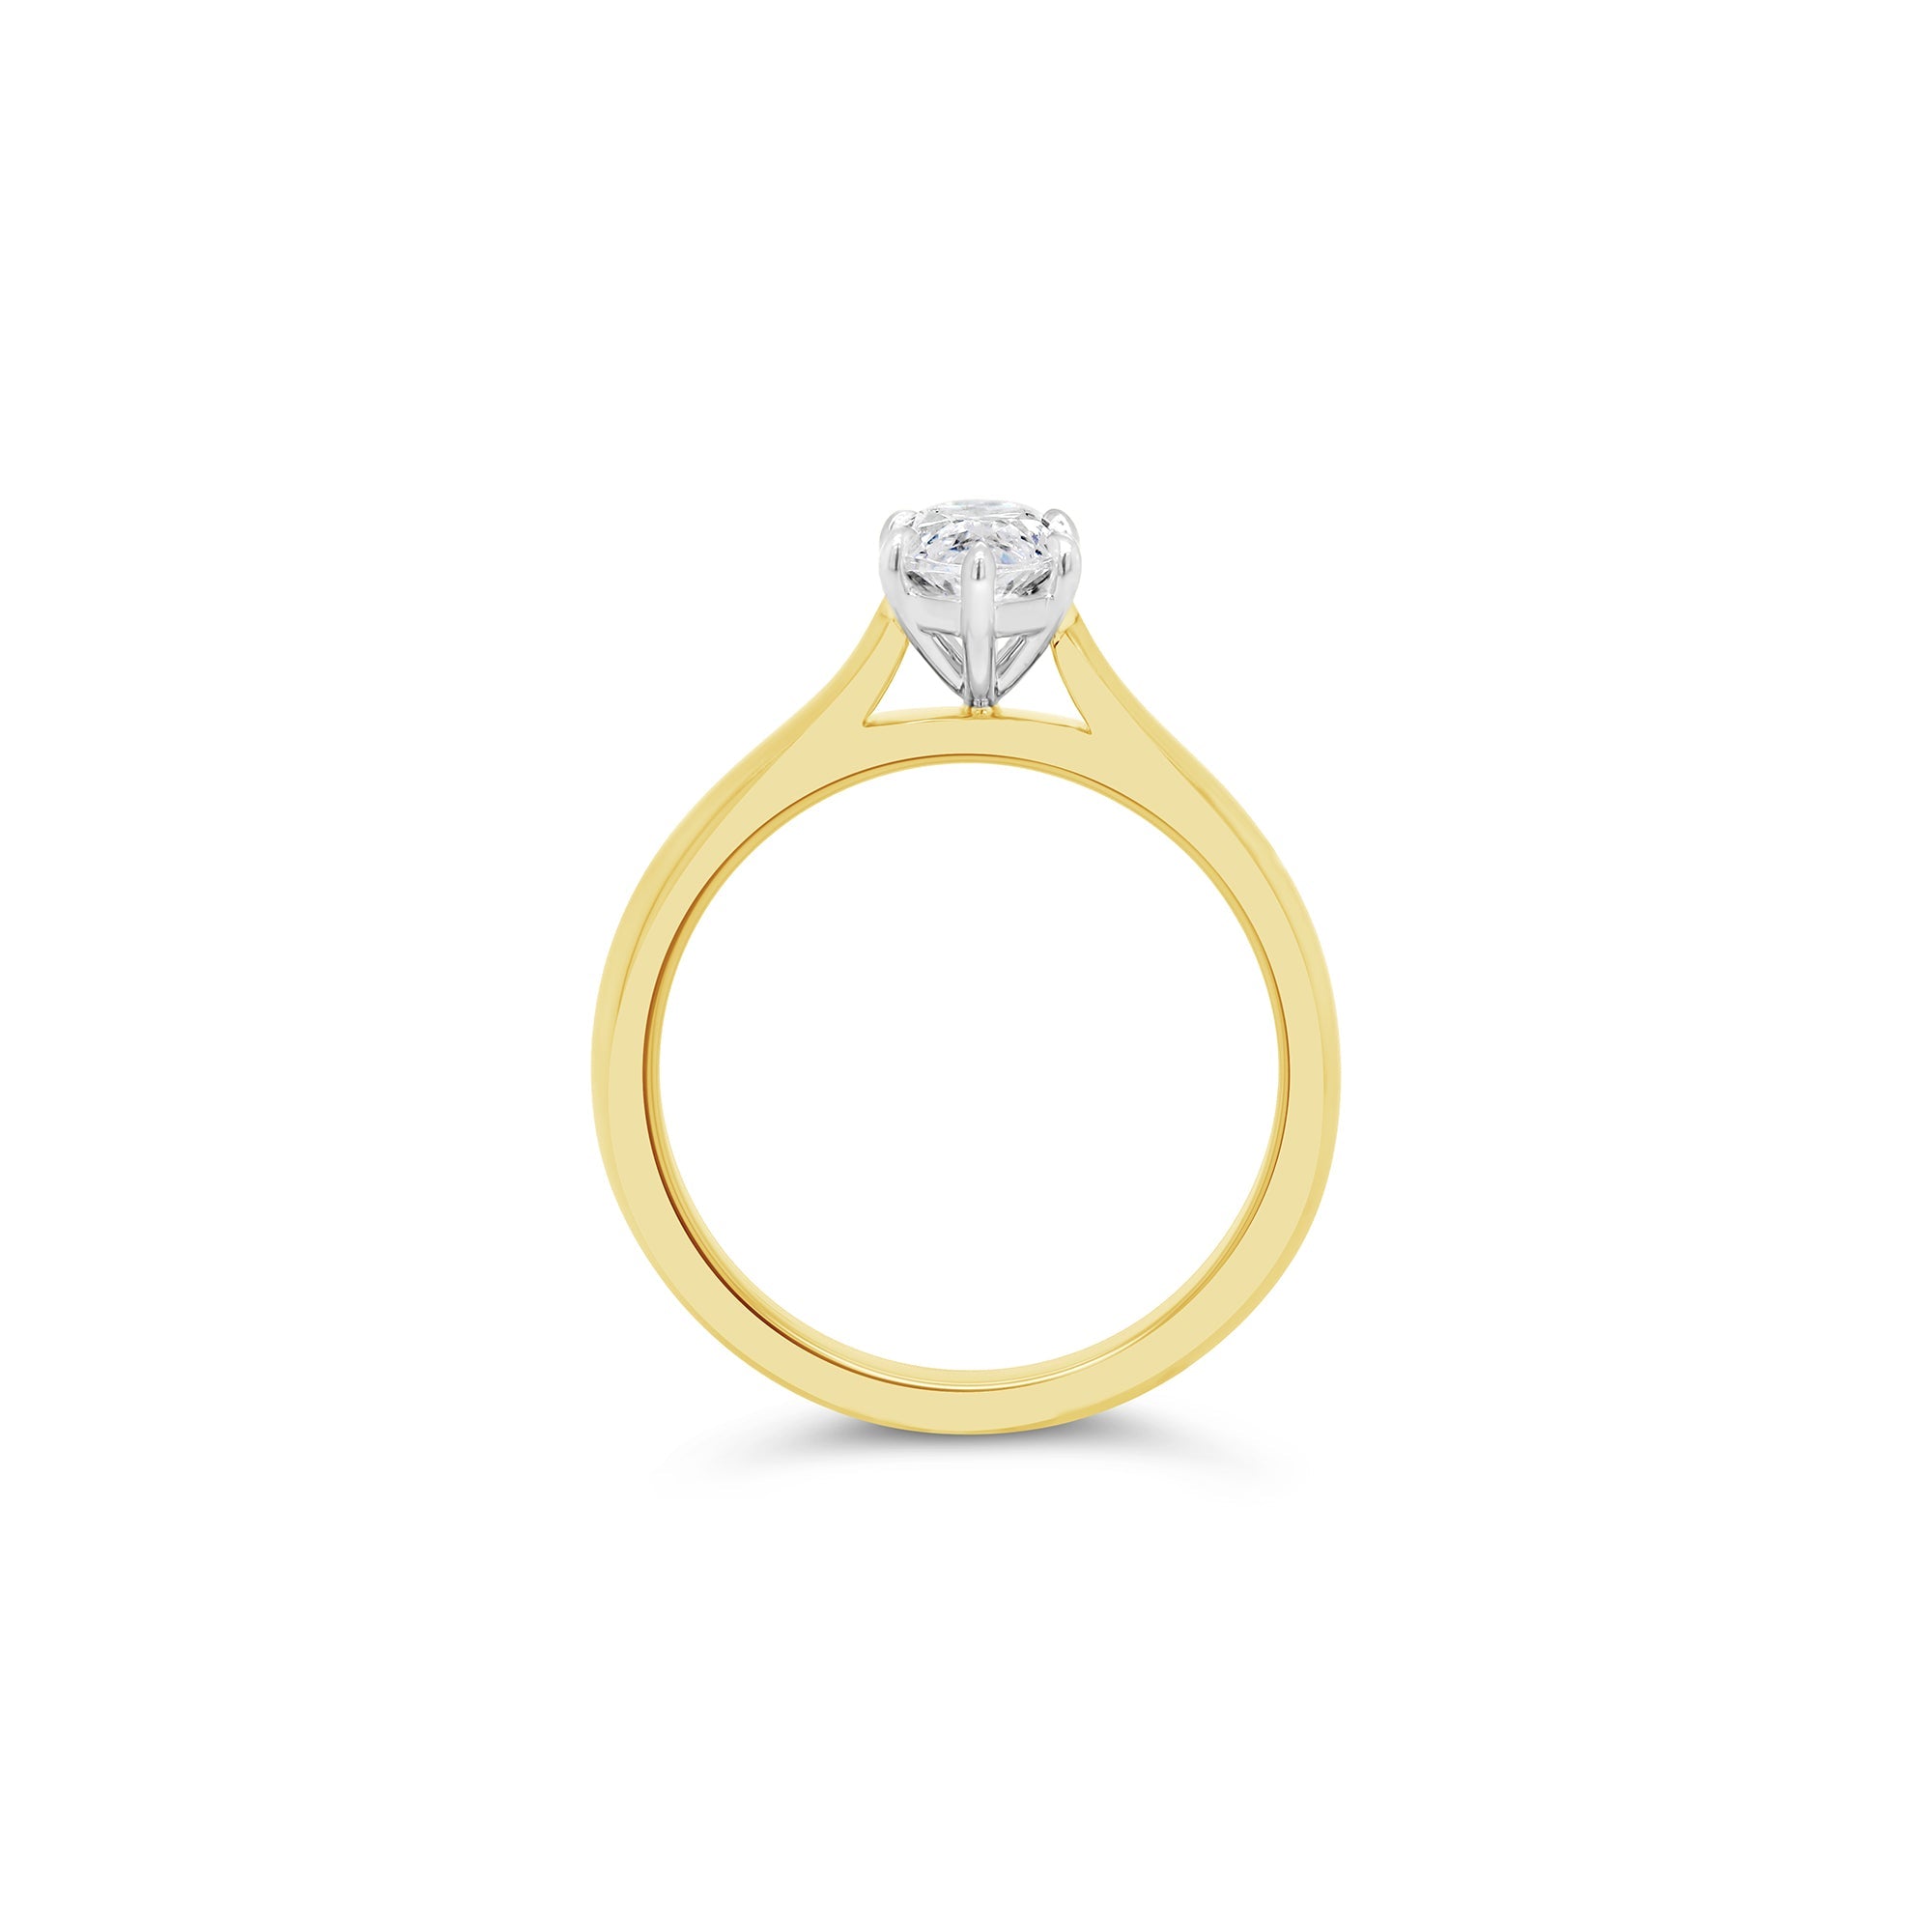 Marquise Cut Solitaire Diamond Engagement Ring yellow gold